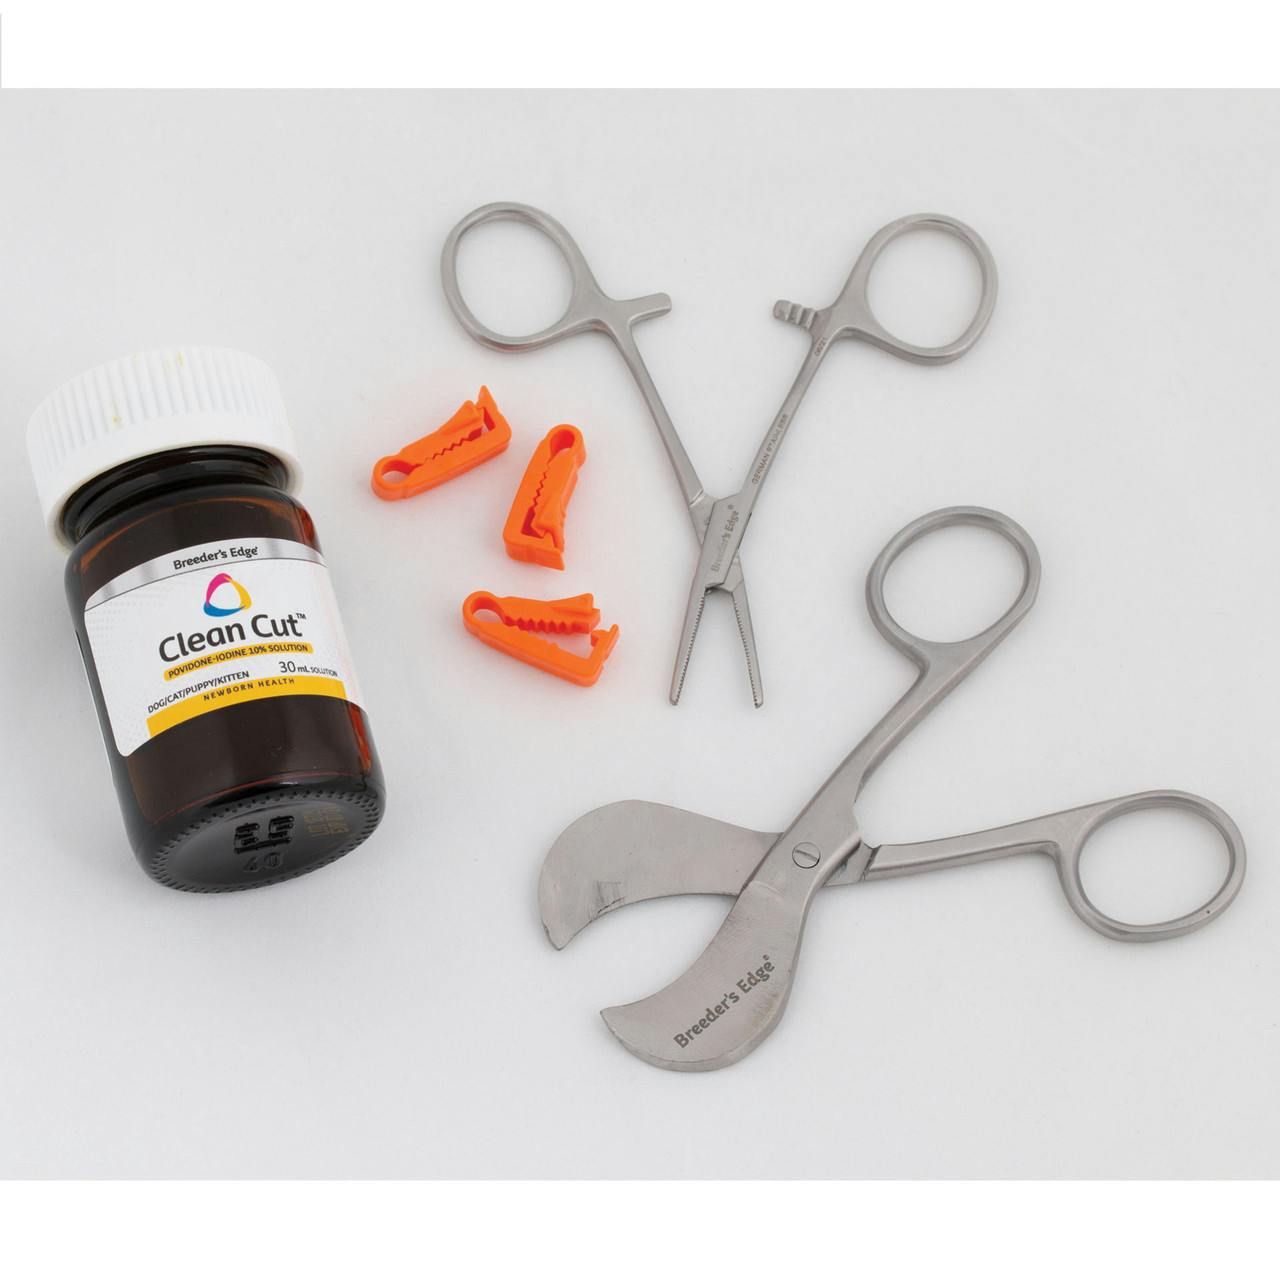 Breeder's Edge® Clean Cut™ Product Bundle with non-staining povidone iodine, precision sharpened umbilical scissors, stainless steel forceps and twelve umbilical clamps